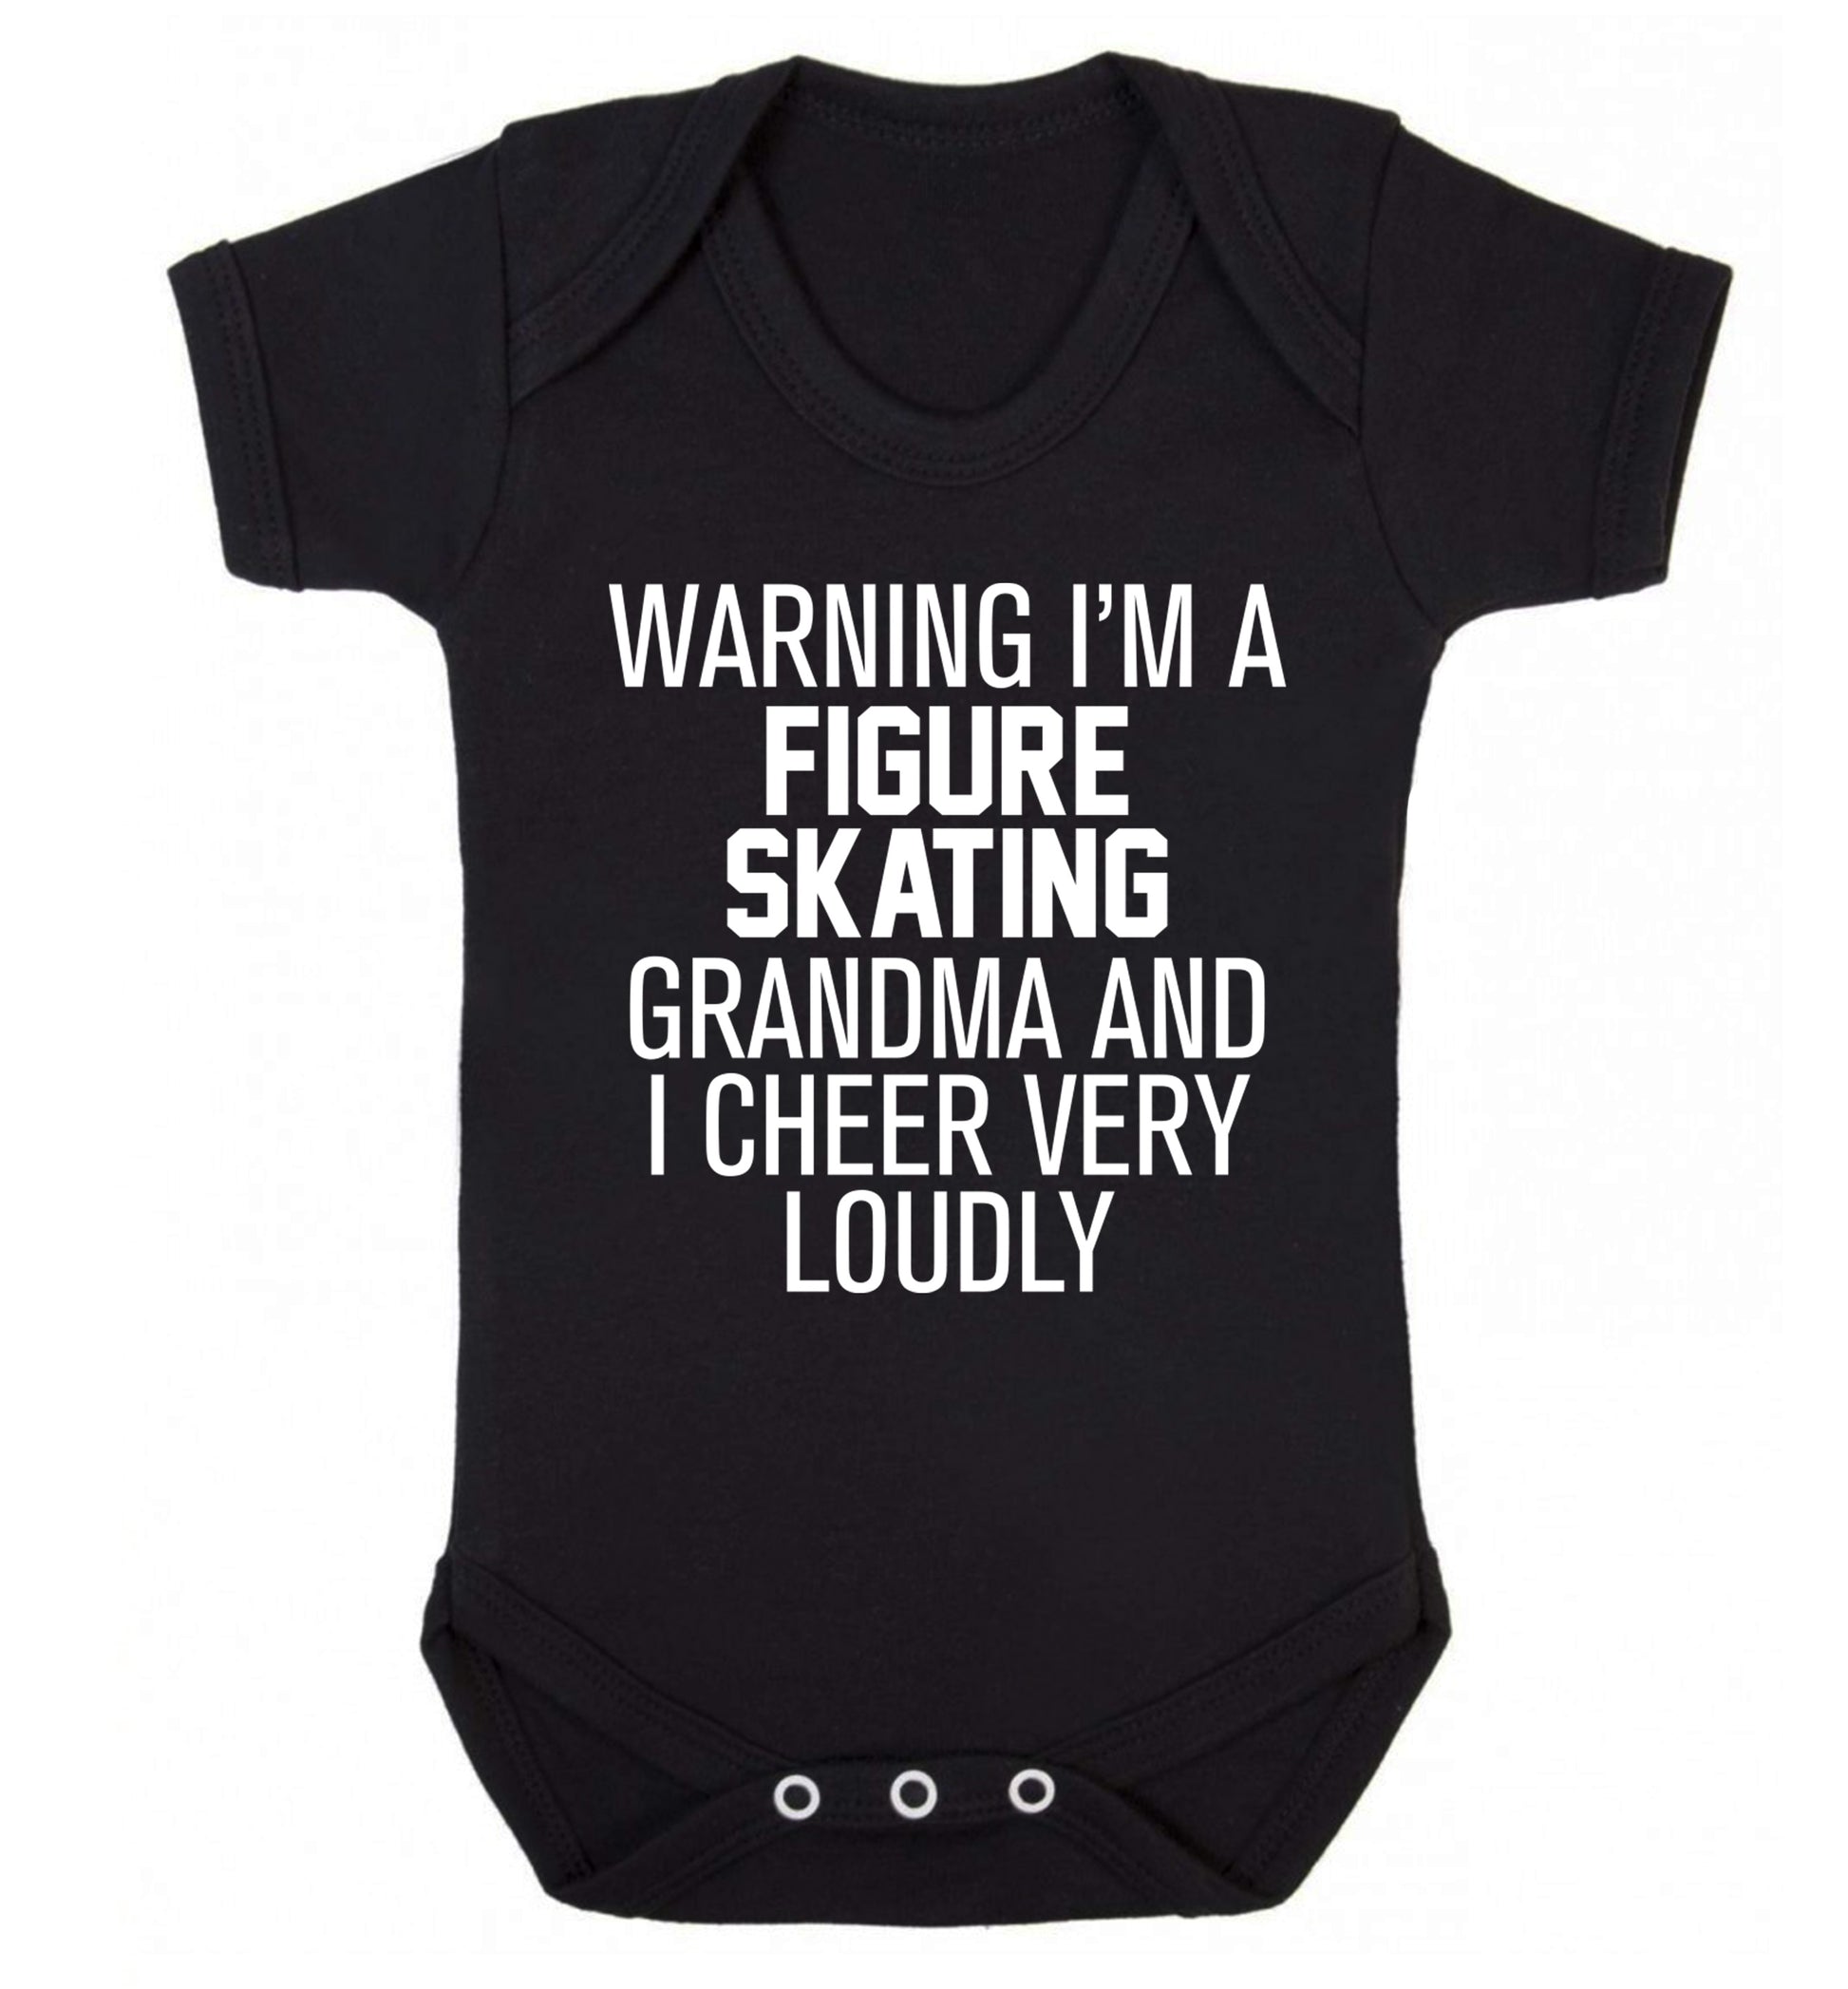 Warning I'm a figure skating grandma and I cheer very loudly Baby Vest black 18-24 months